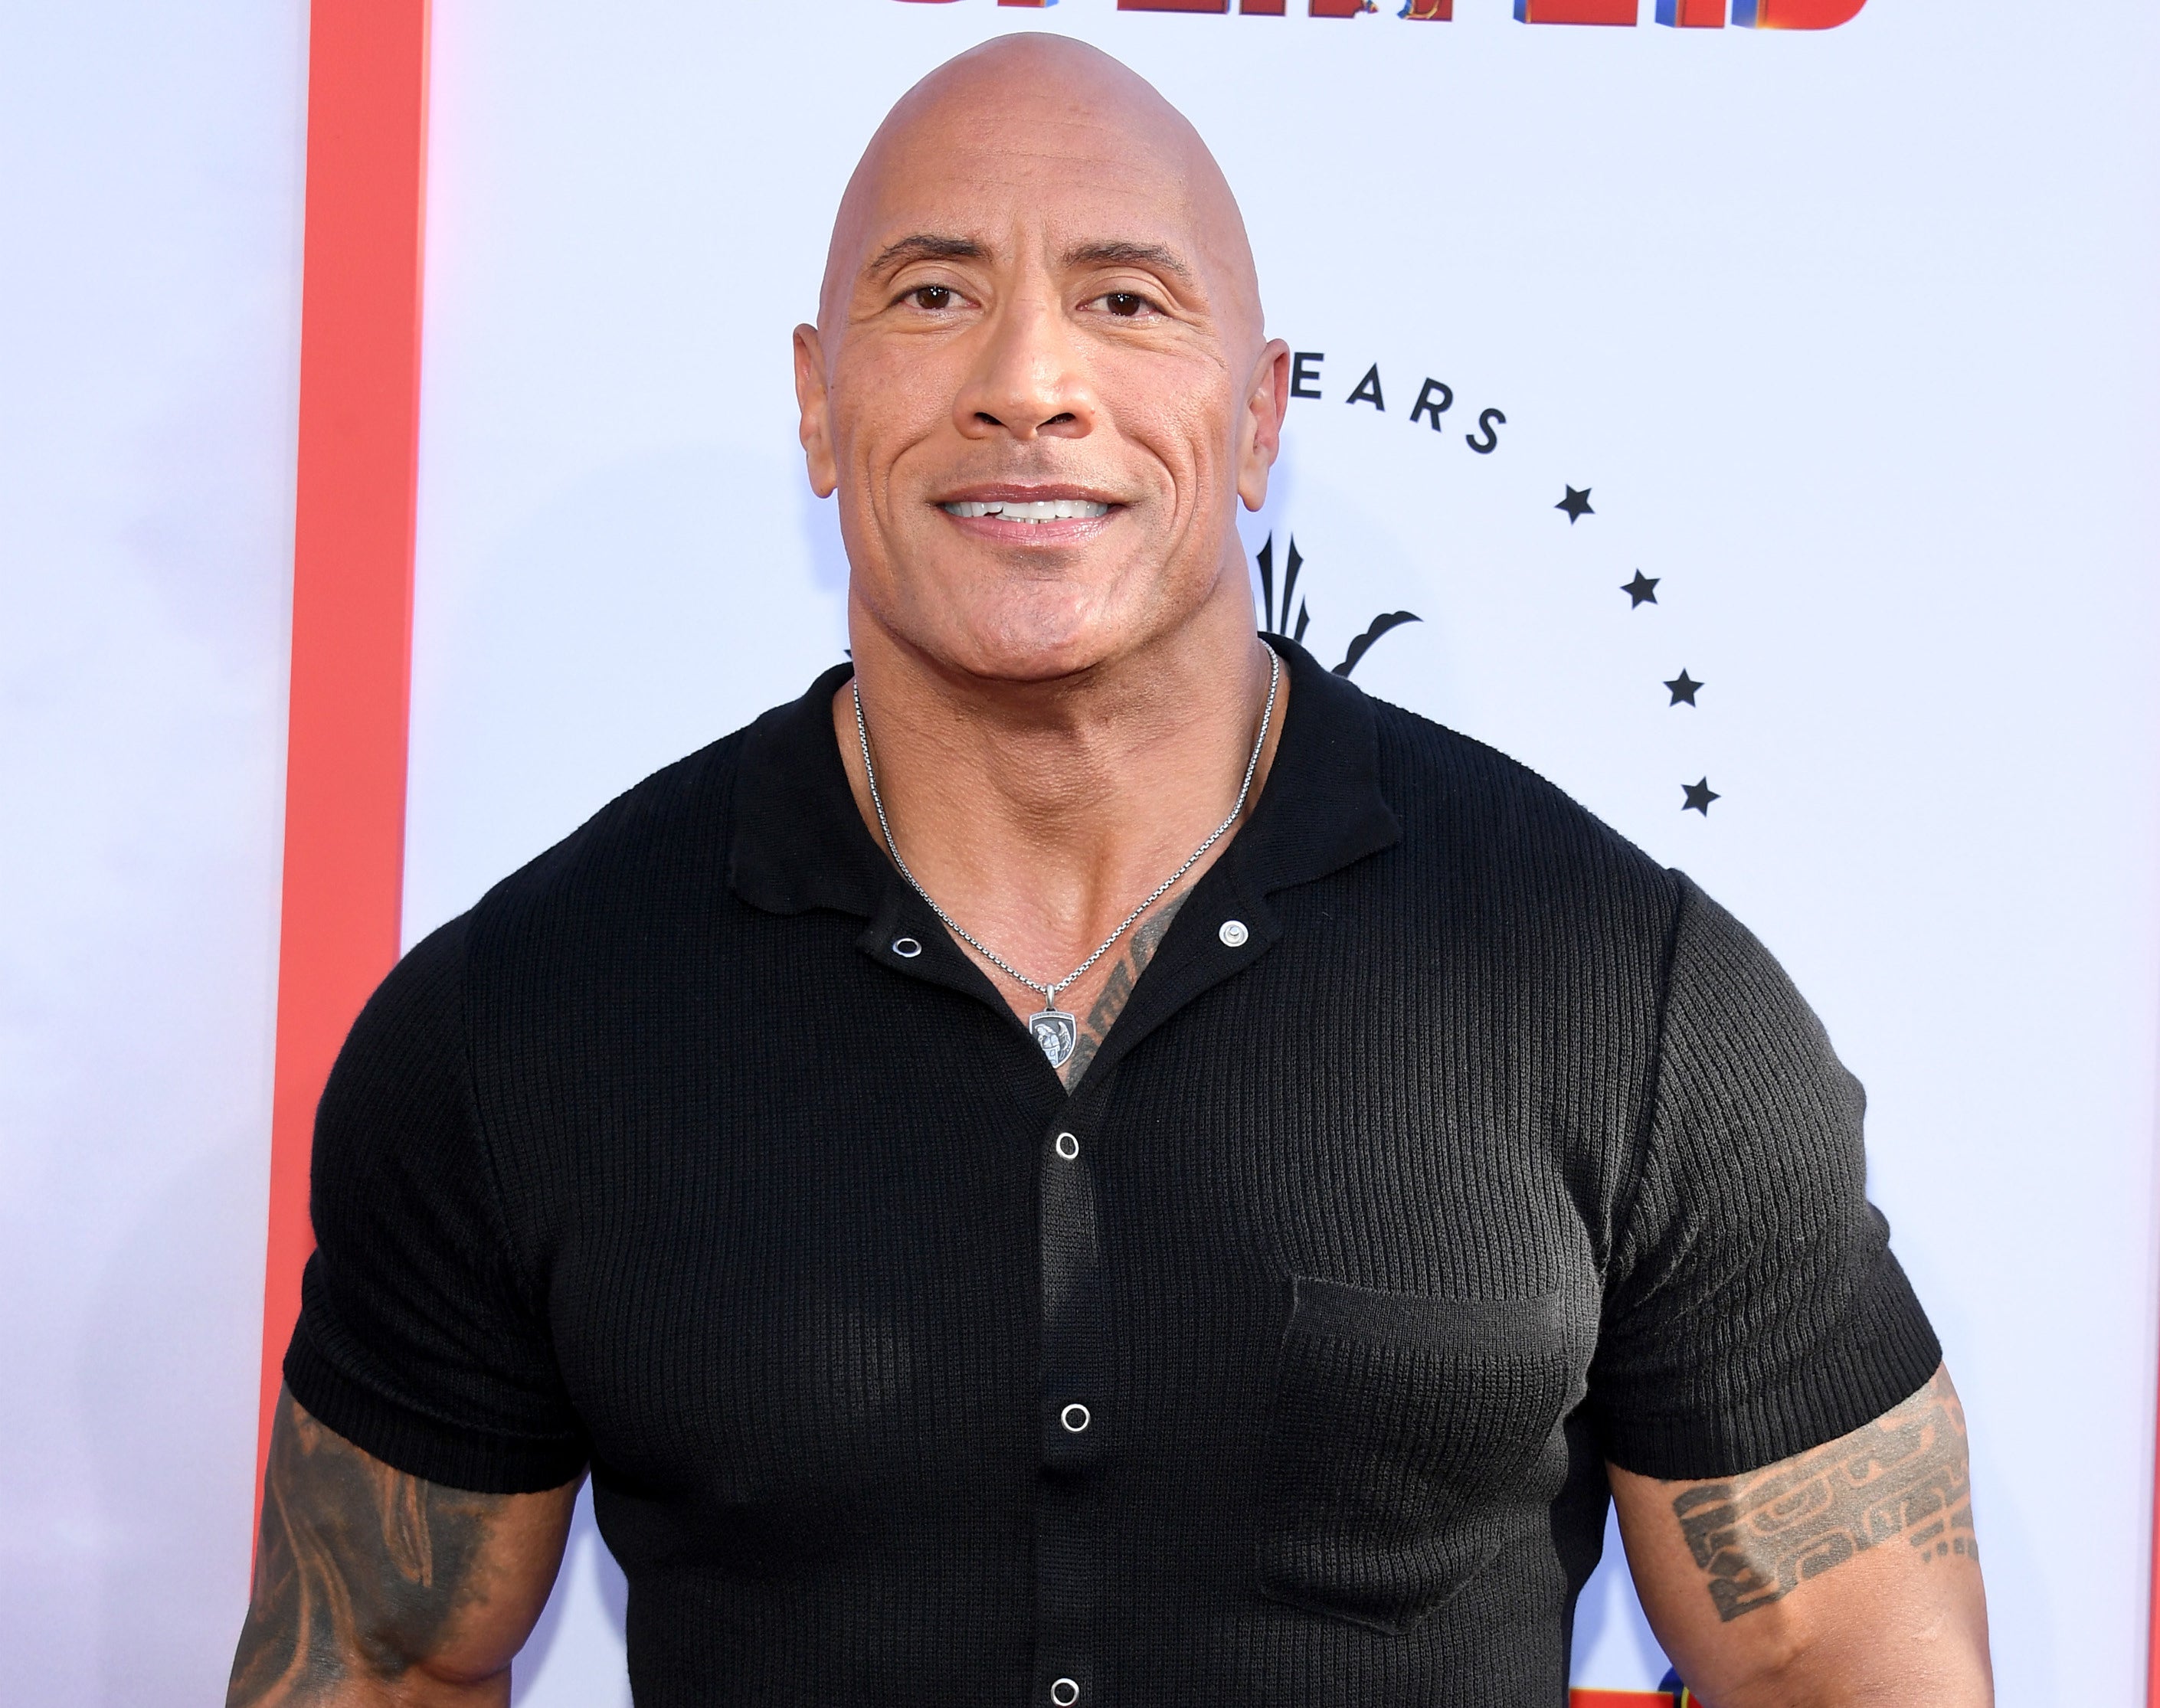 Dwayne in a short-sleeved shirt showing his biceps and tattoos